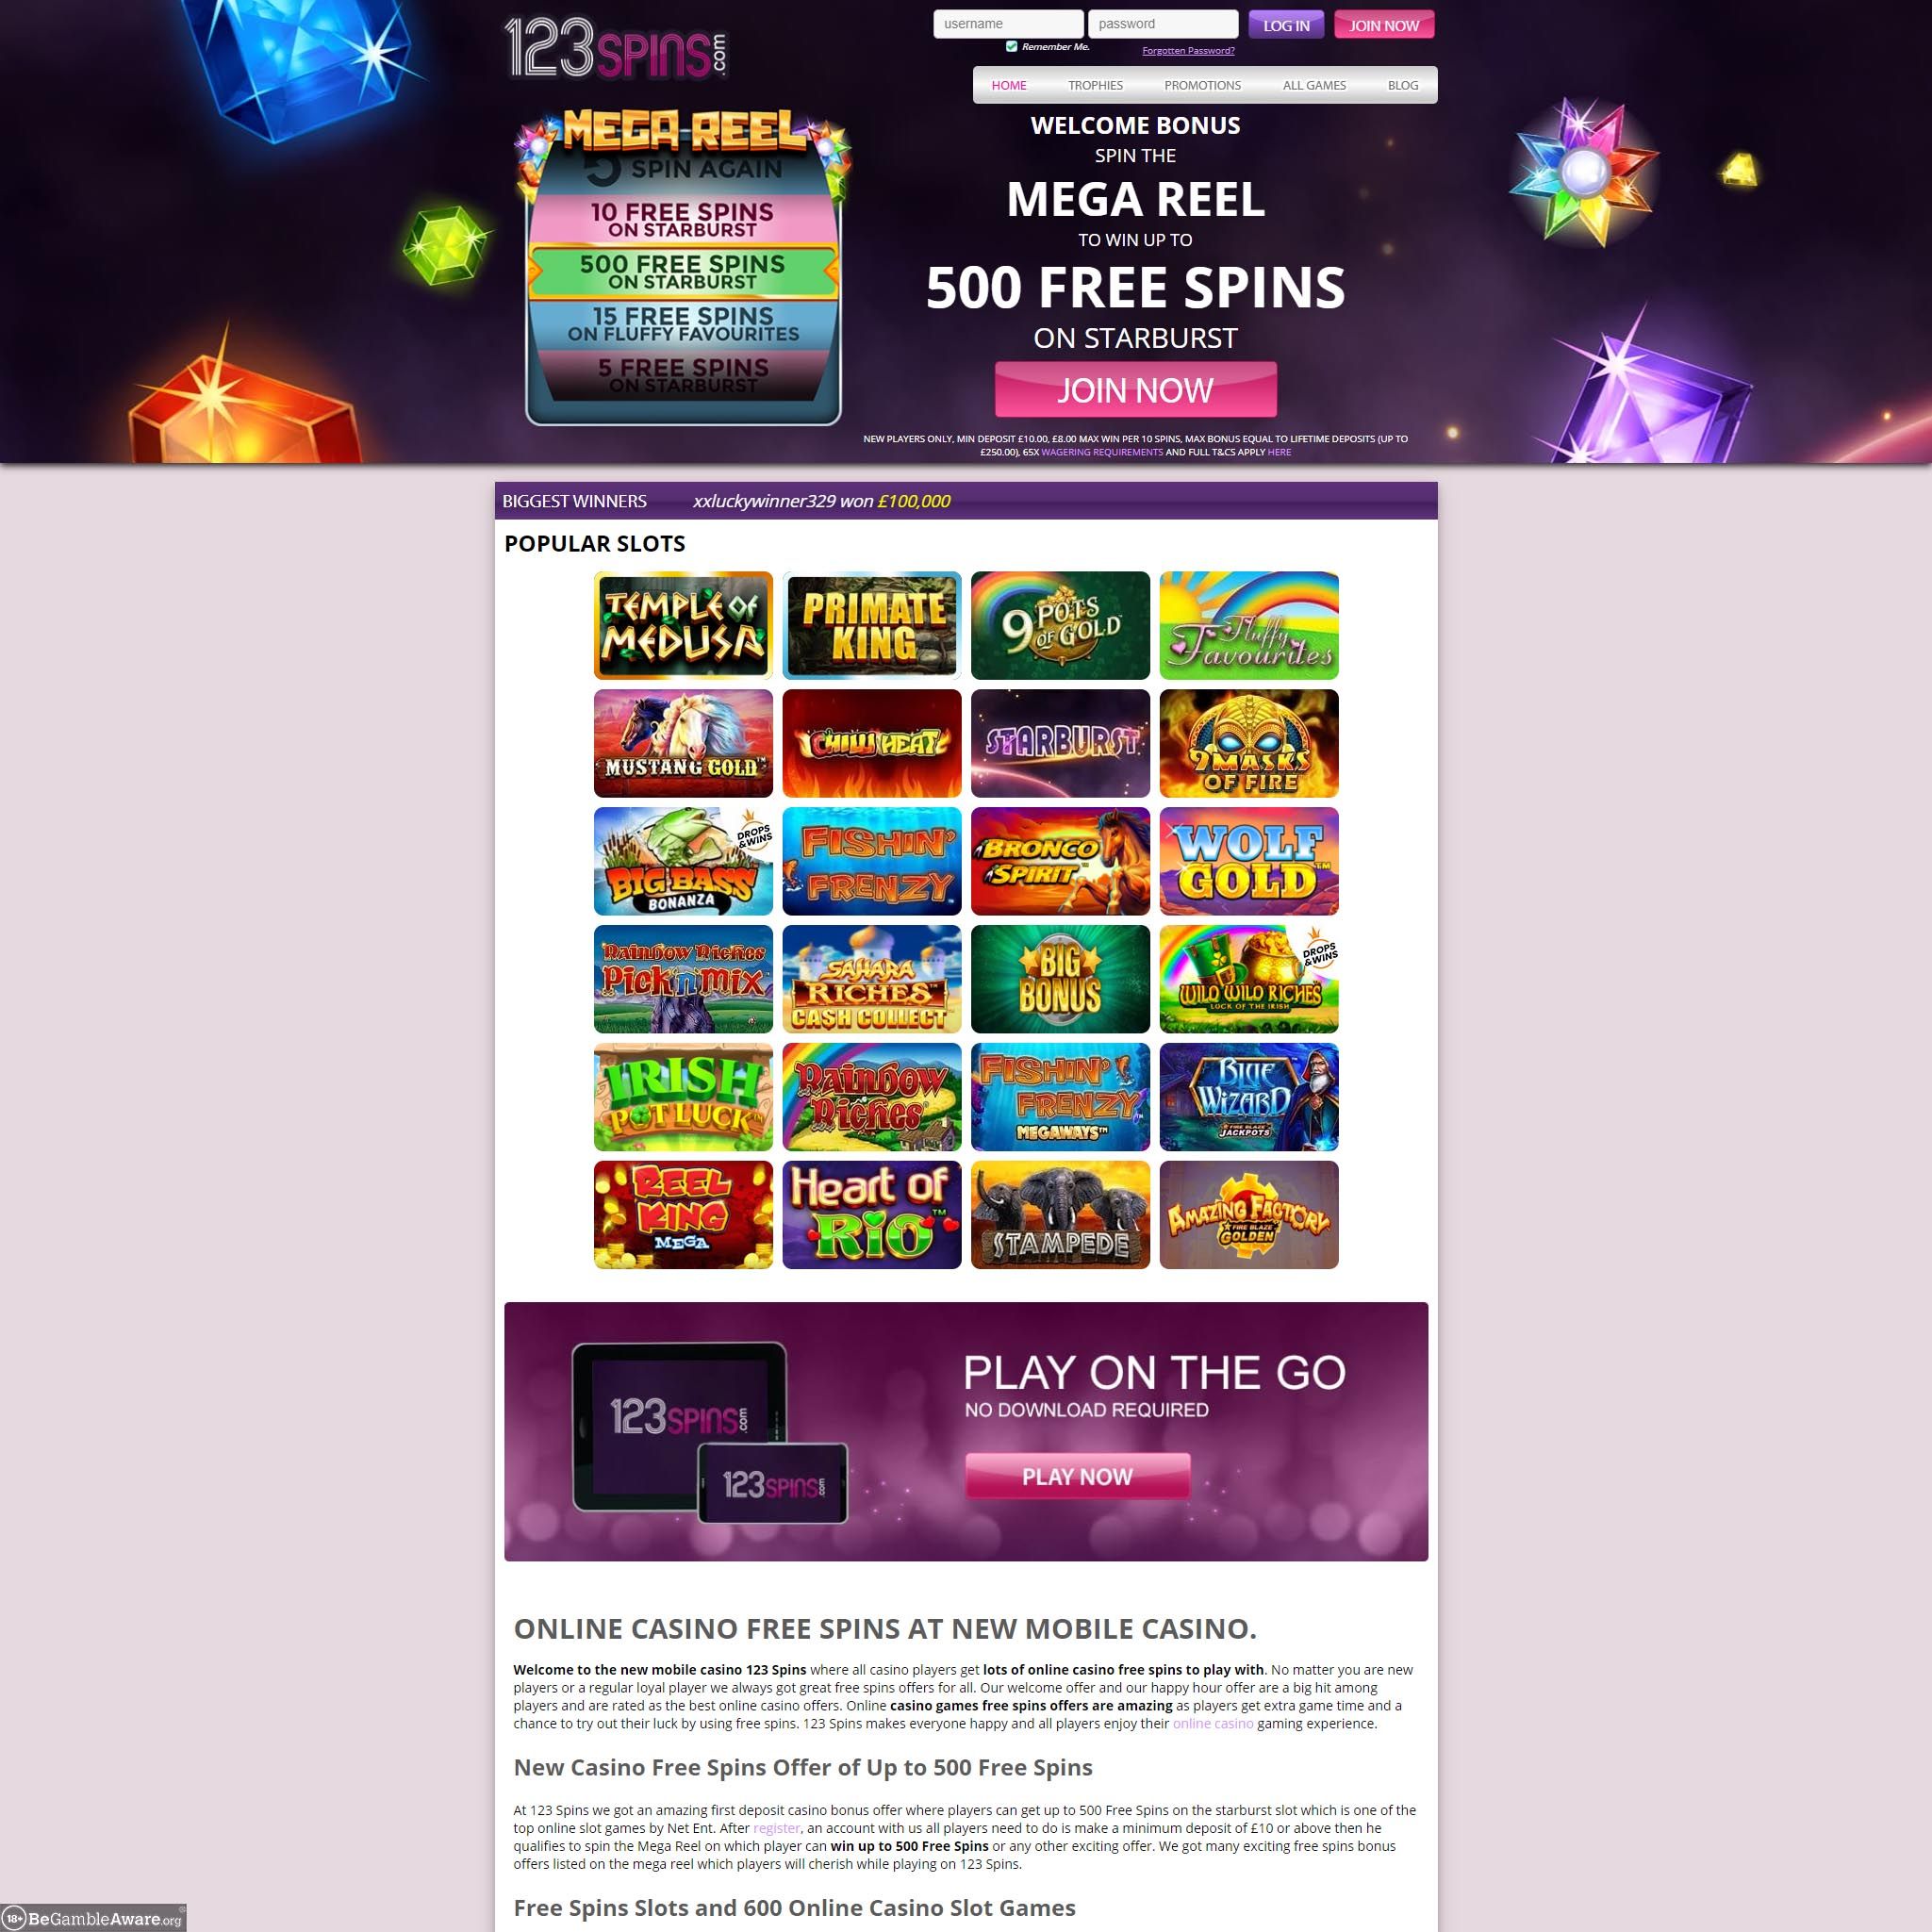 123spins Casino UK review by Mr. Gamble